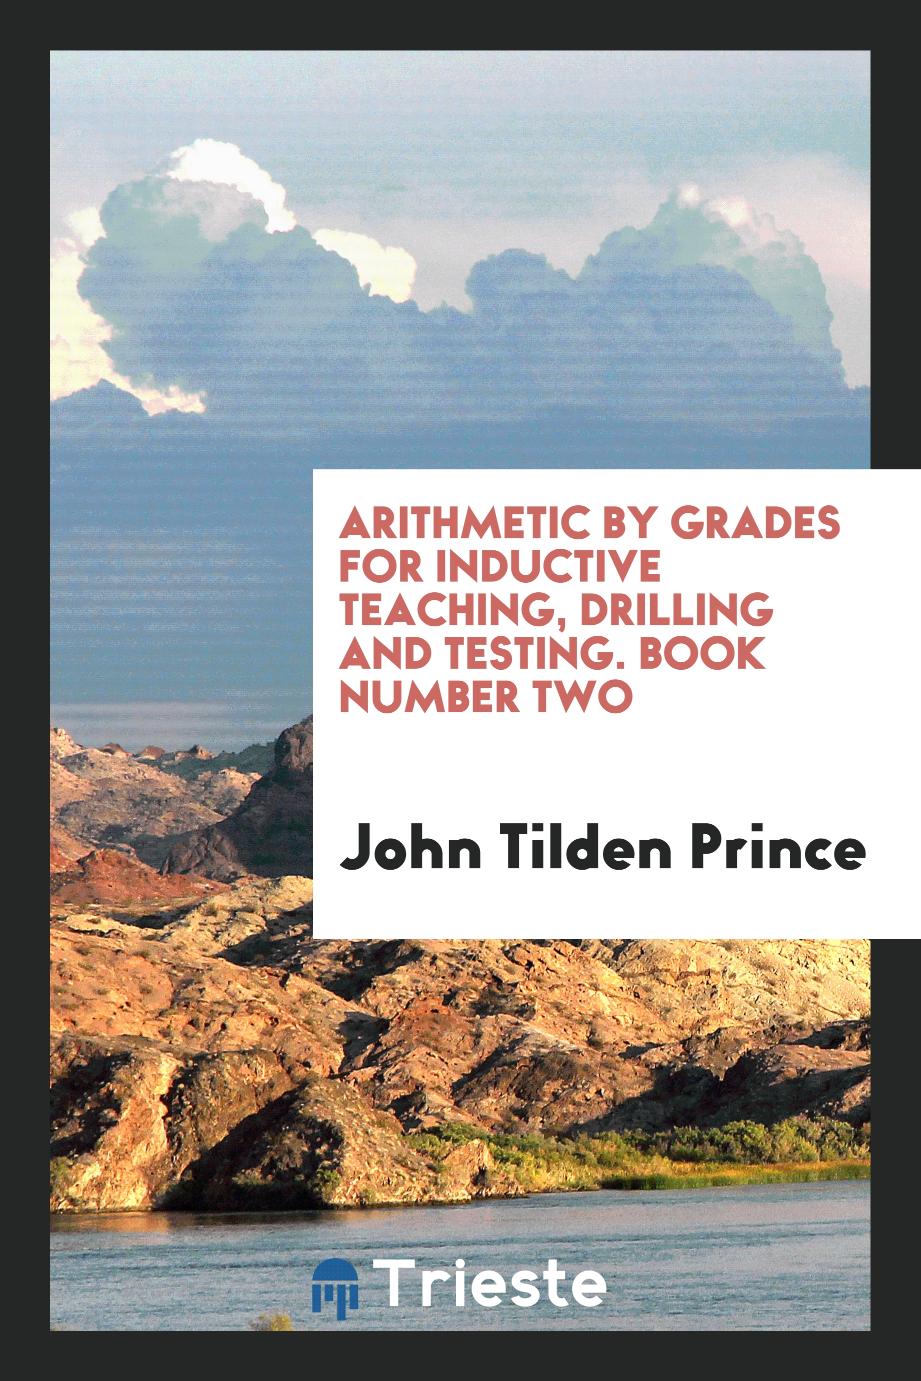 Arithmetic by Grades for Inductive Teaching, Drilling and Testing. Book Number Two